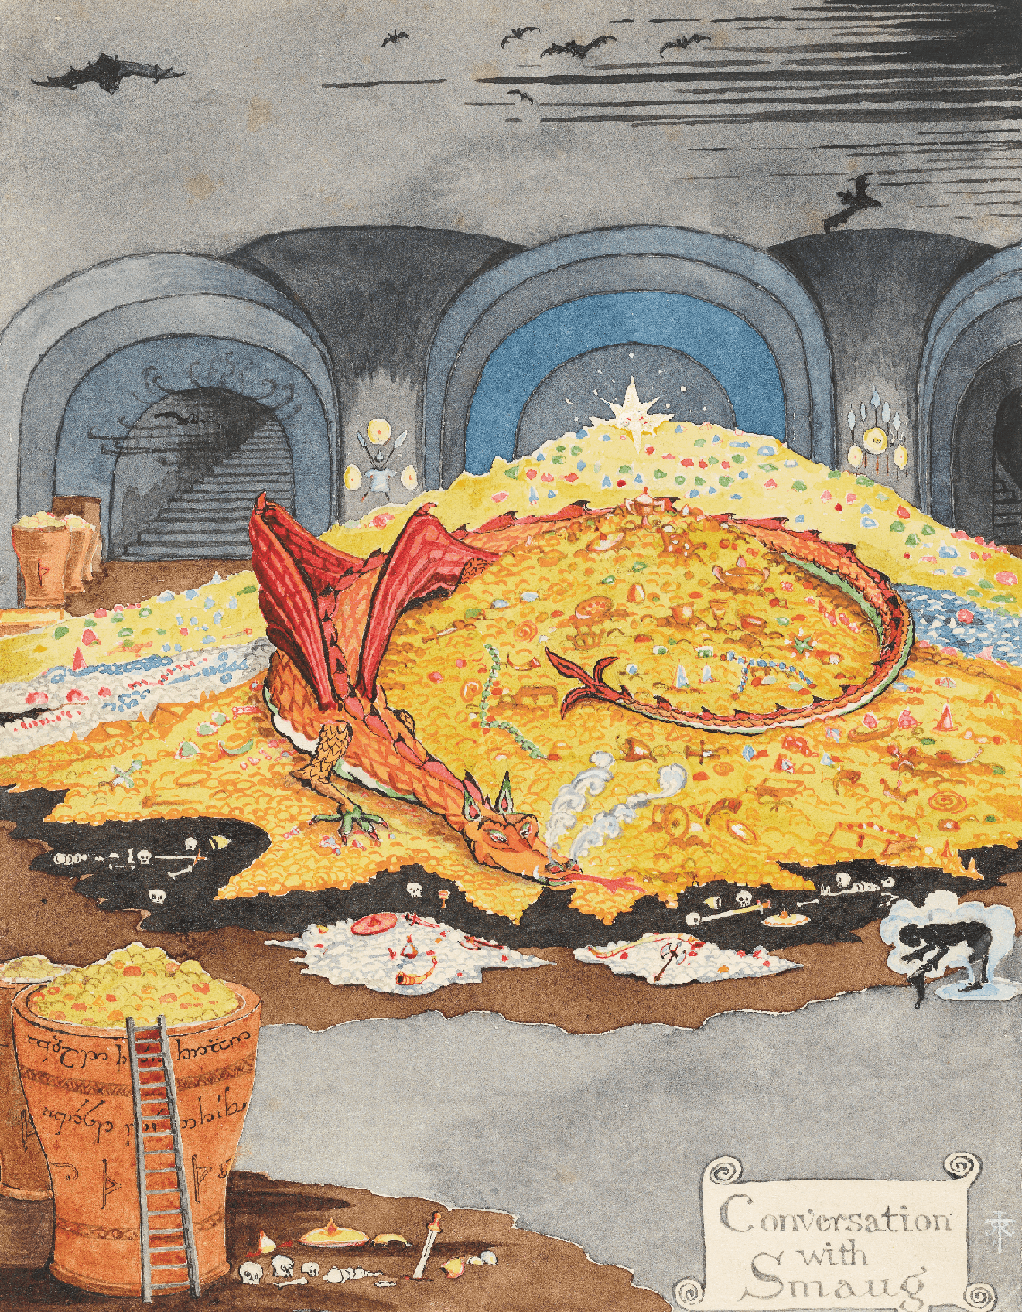 “Conversation with Smaug,” July 1937 by J. R. R. Tolkien. Black and colored ink, watercolor, white body color, pencil. Bodleian Libraries. (The Tolkien Estate Limited 1937)